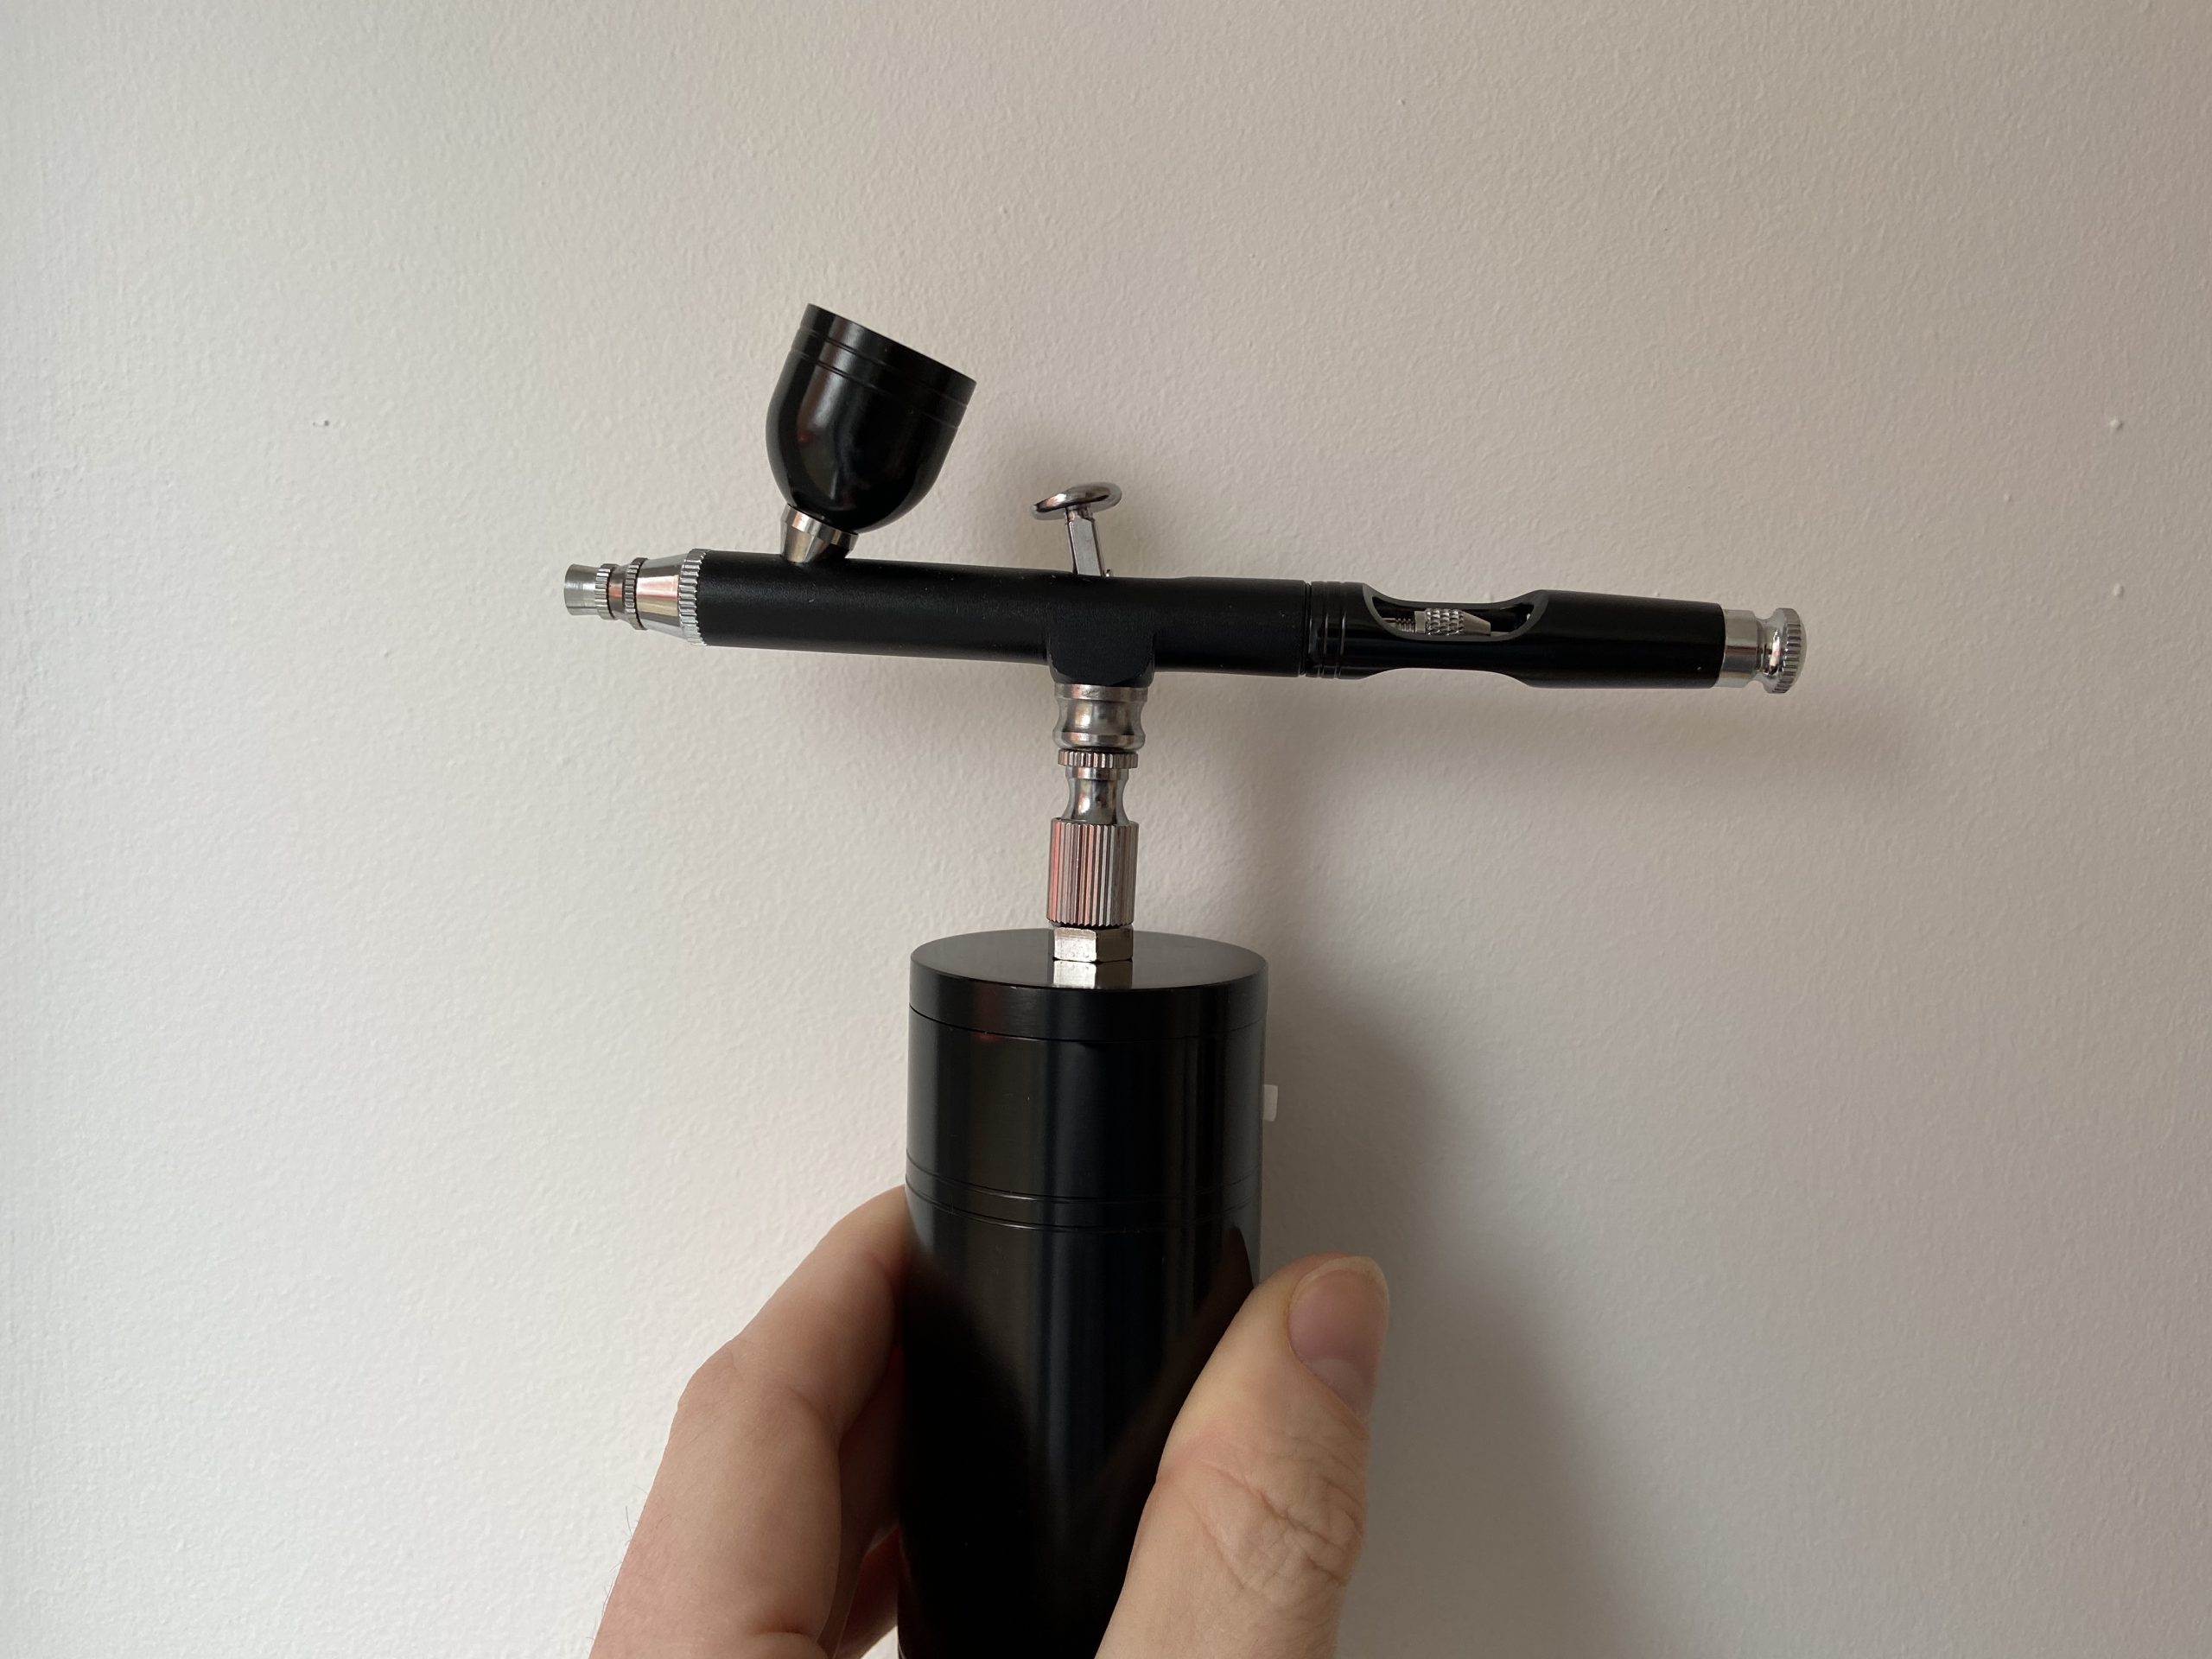 How to connect Airbrush with Compressor? : r/airbrush